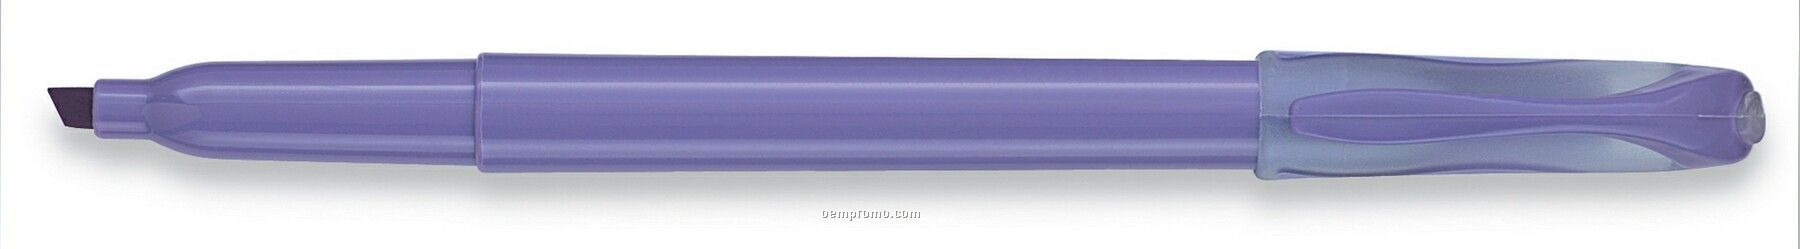 Sharpie Pocket Accent Fluorescent Purple Capped Highlighter